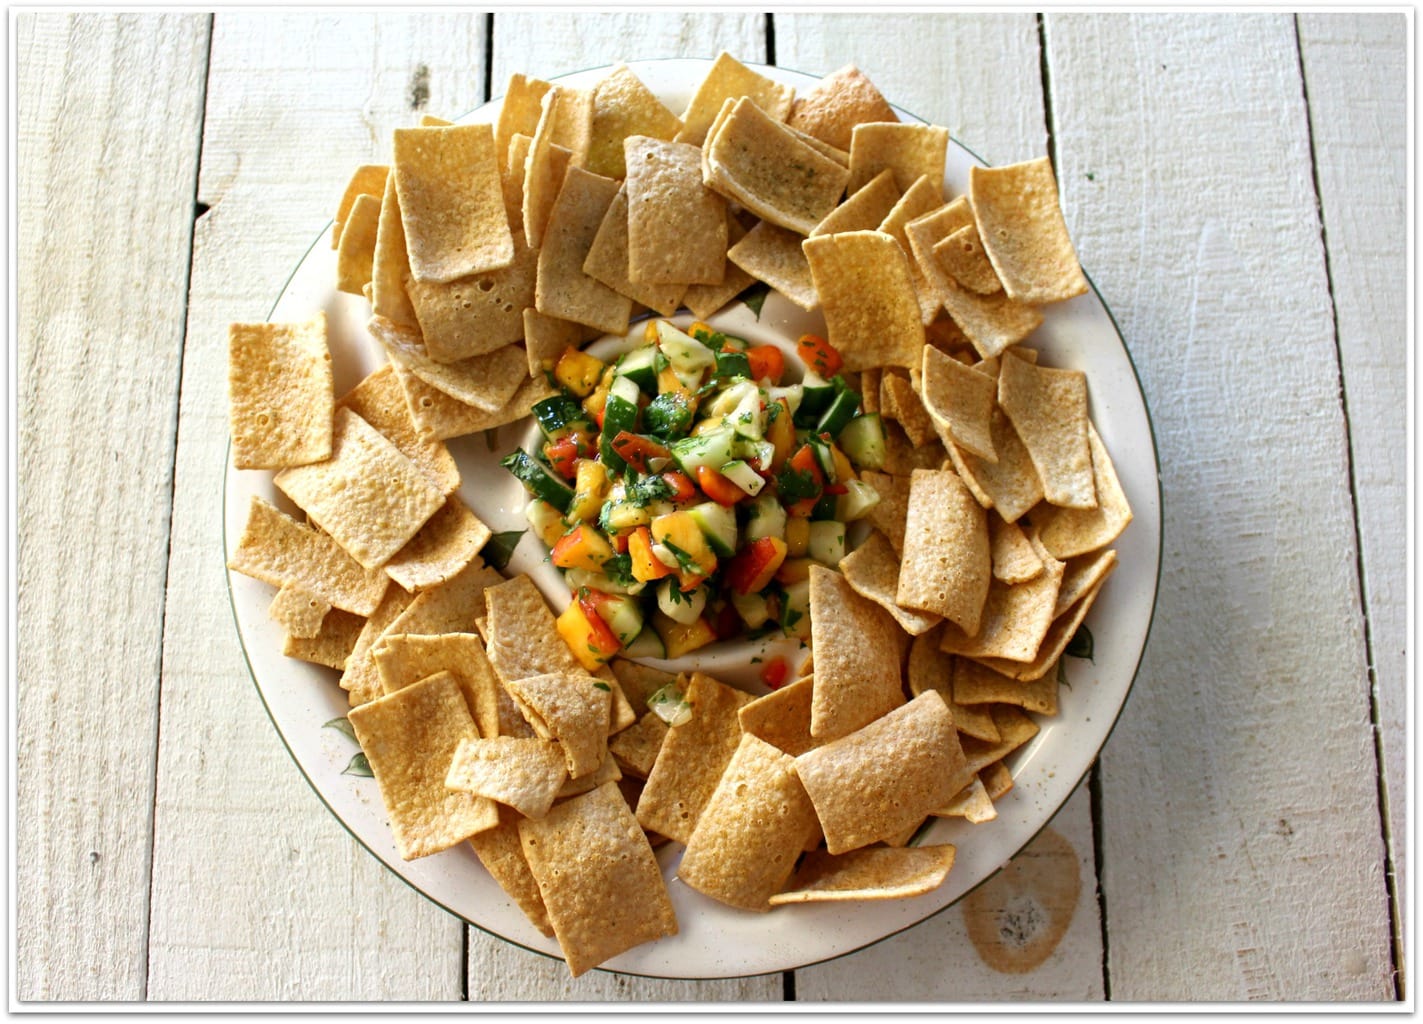 What could be better at a cookout or party than fresh peach and cucumber salsa? It doesn't matter what's on the table, I gravitate towards the chips and salsa. Any kind of salsa will do!